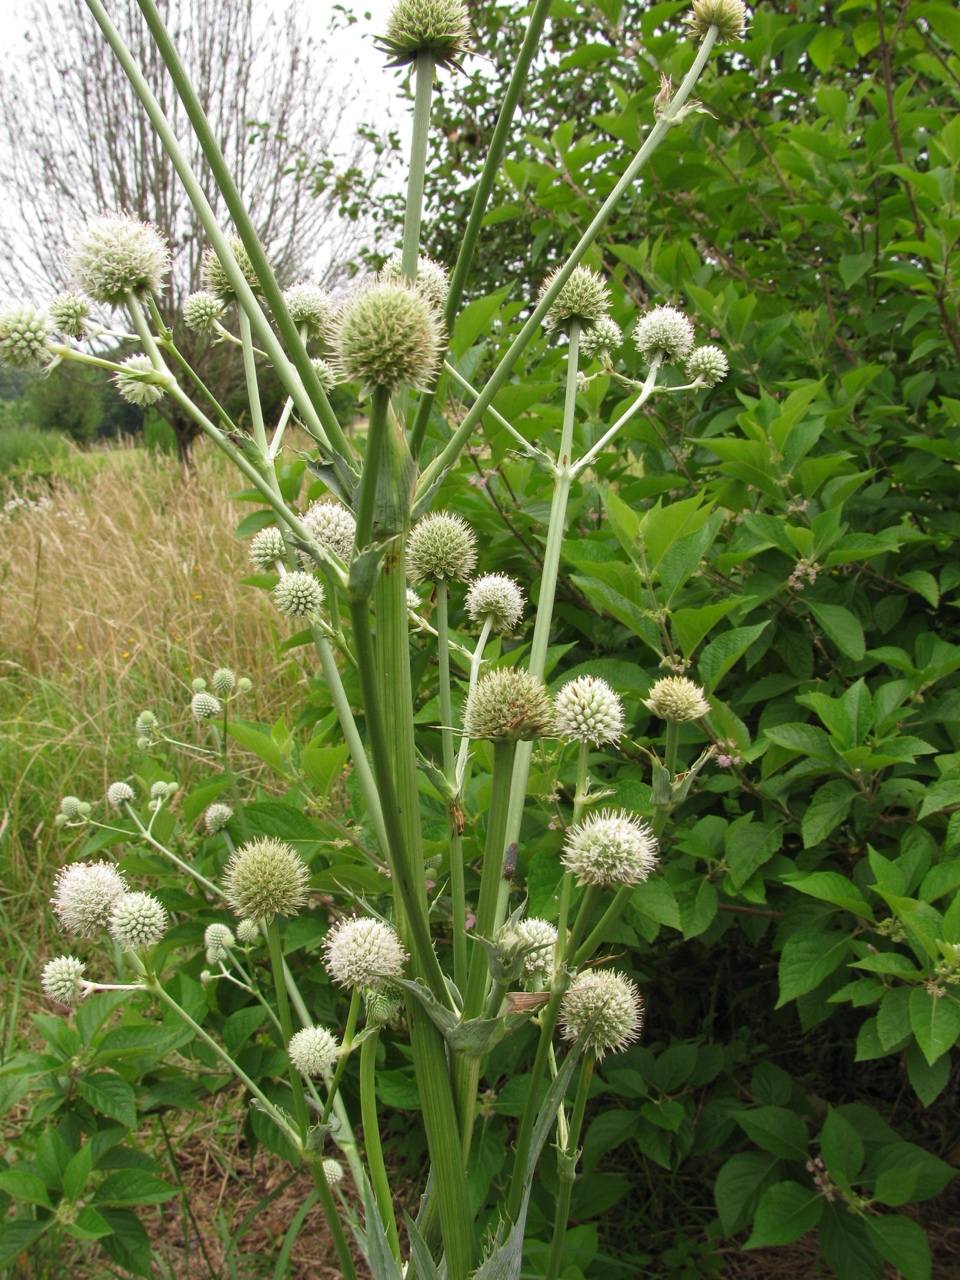 The Scientific Name is Eryngium yuccifolium. You will likely hear them called Rattlesnake-master, Button Eryngo. This picture shows the Flowering in June of Eryngium yuccifolium